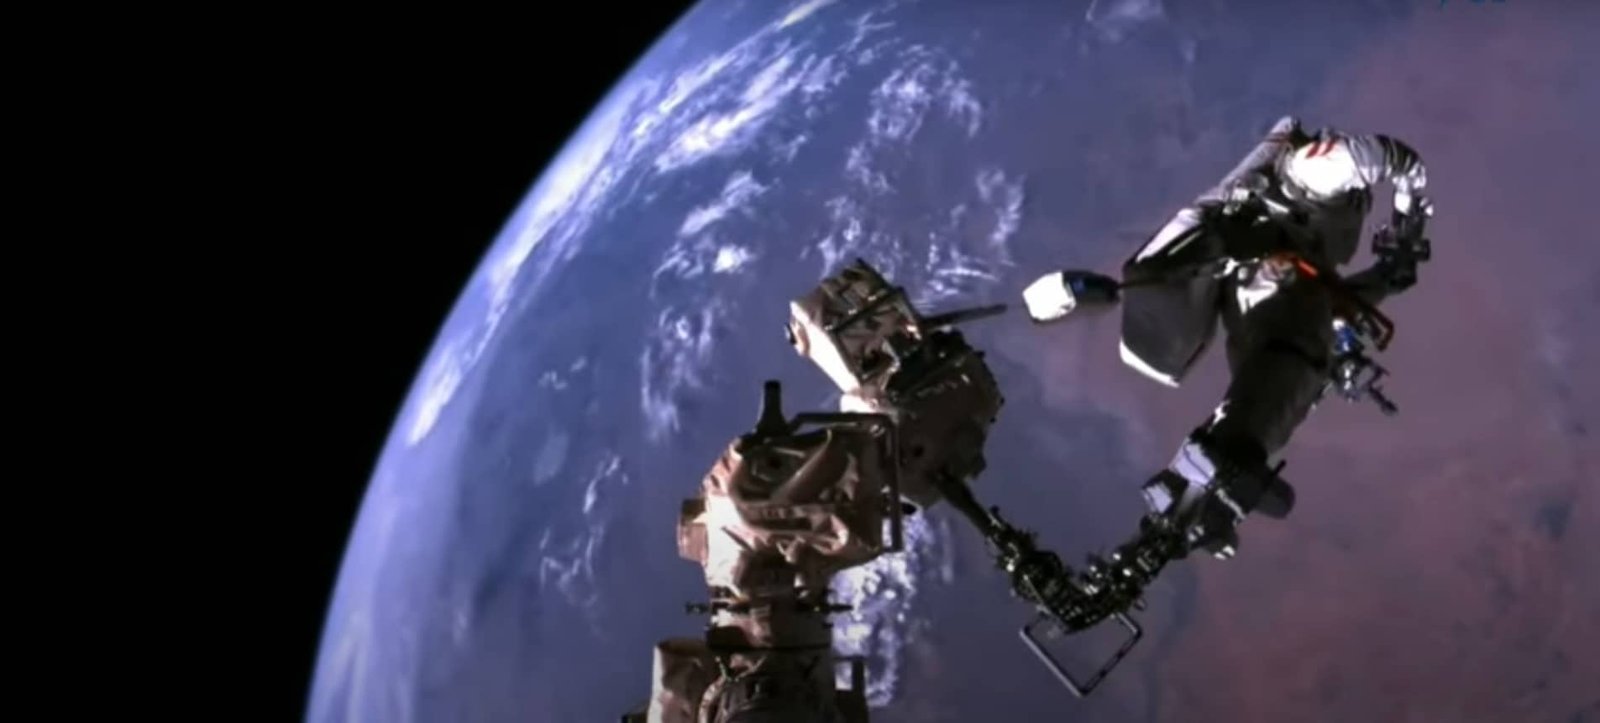 Chinese astronaut hangs in space 450km above the earth watch video